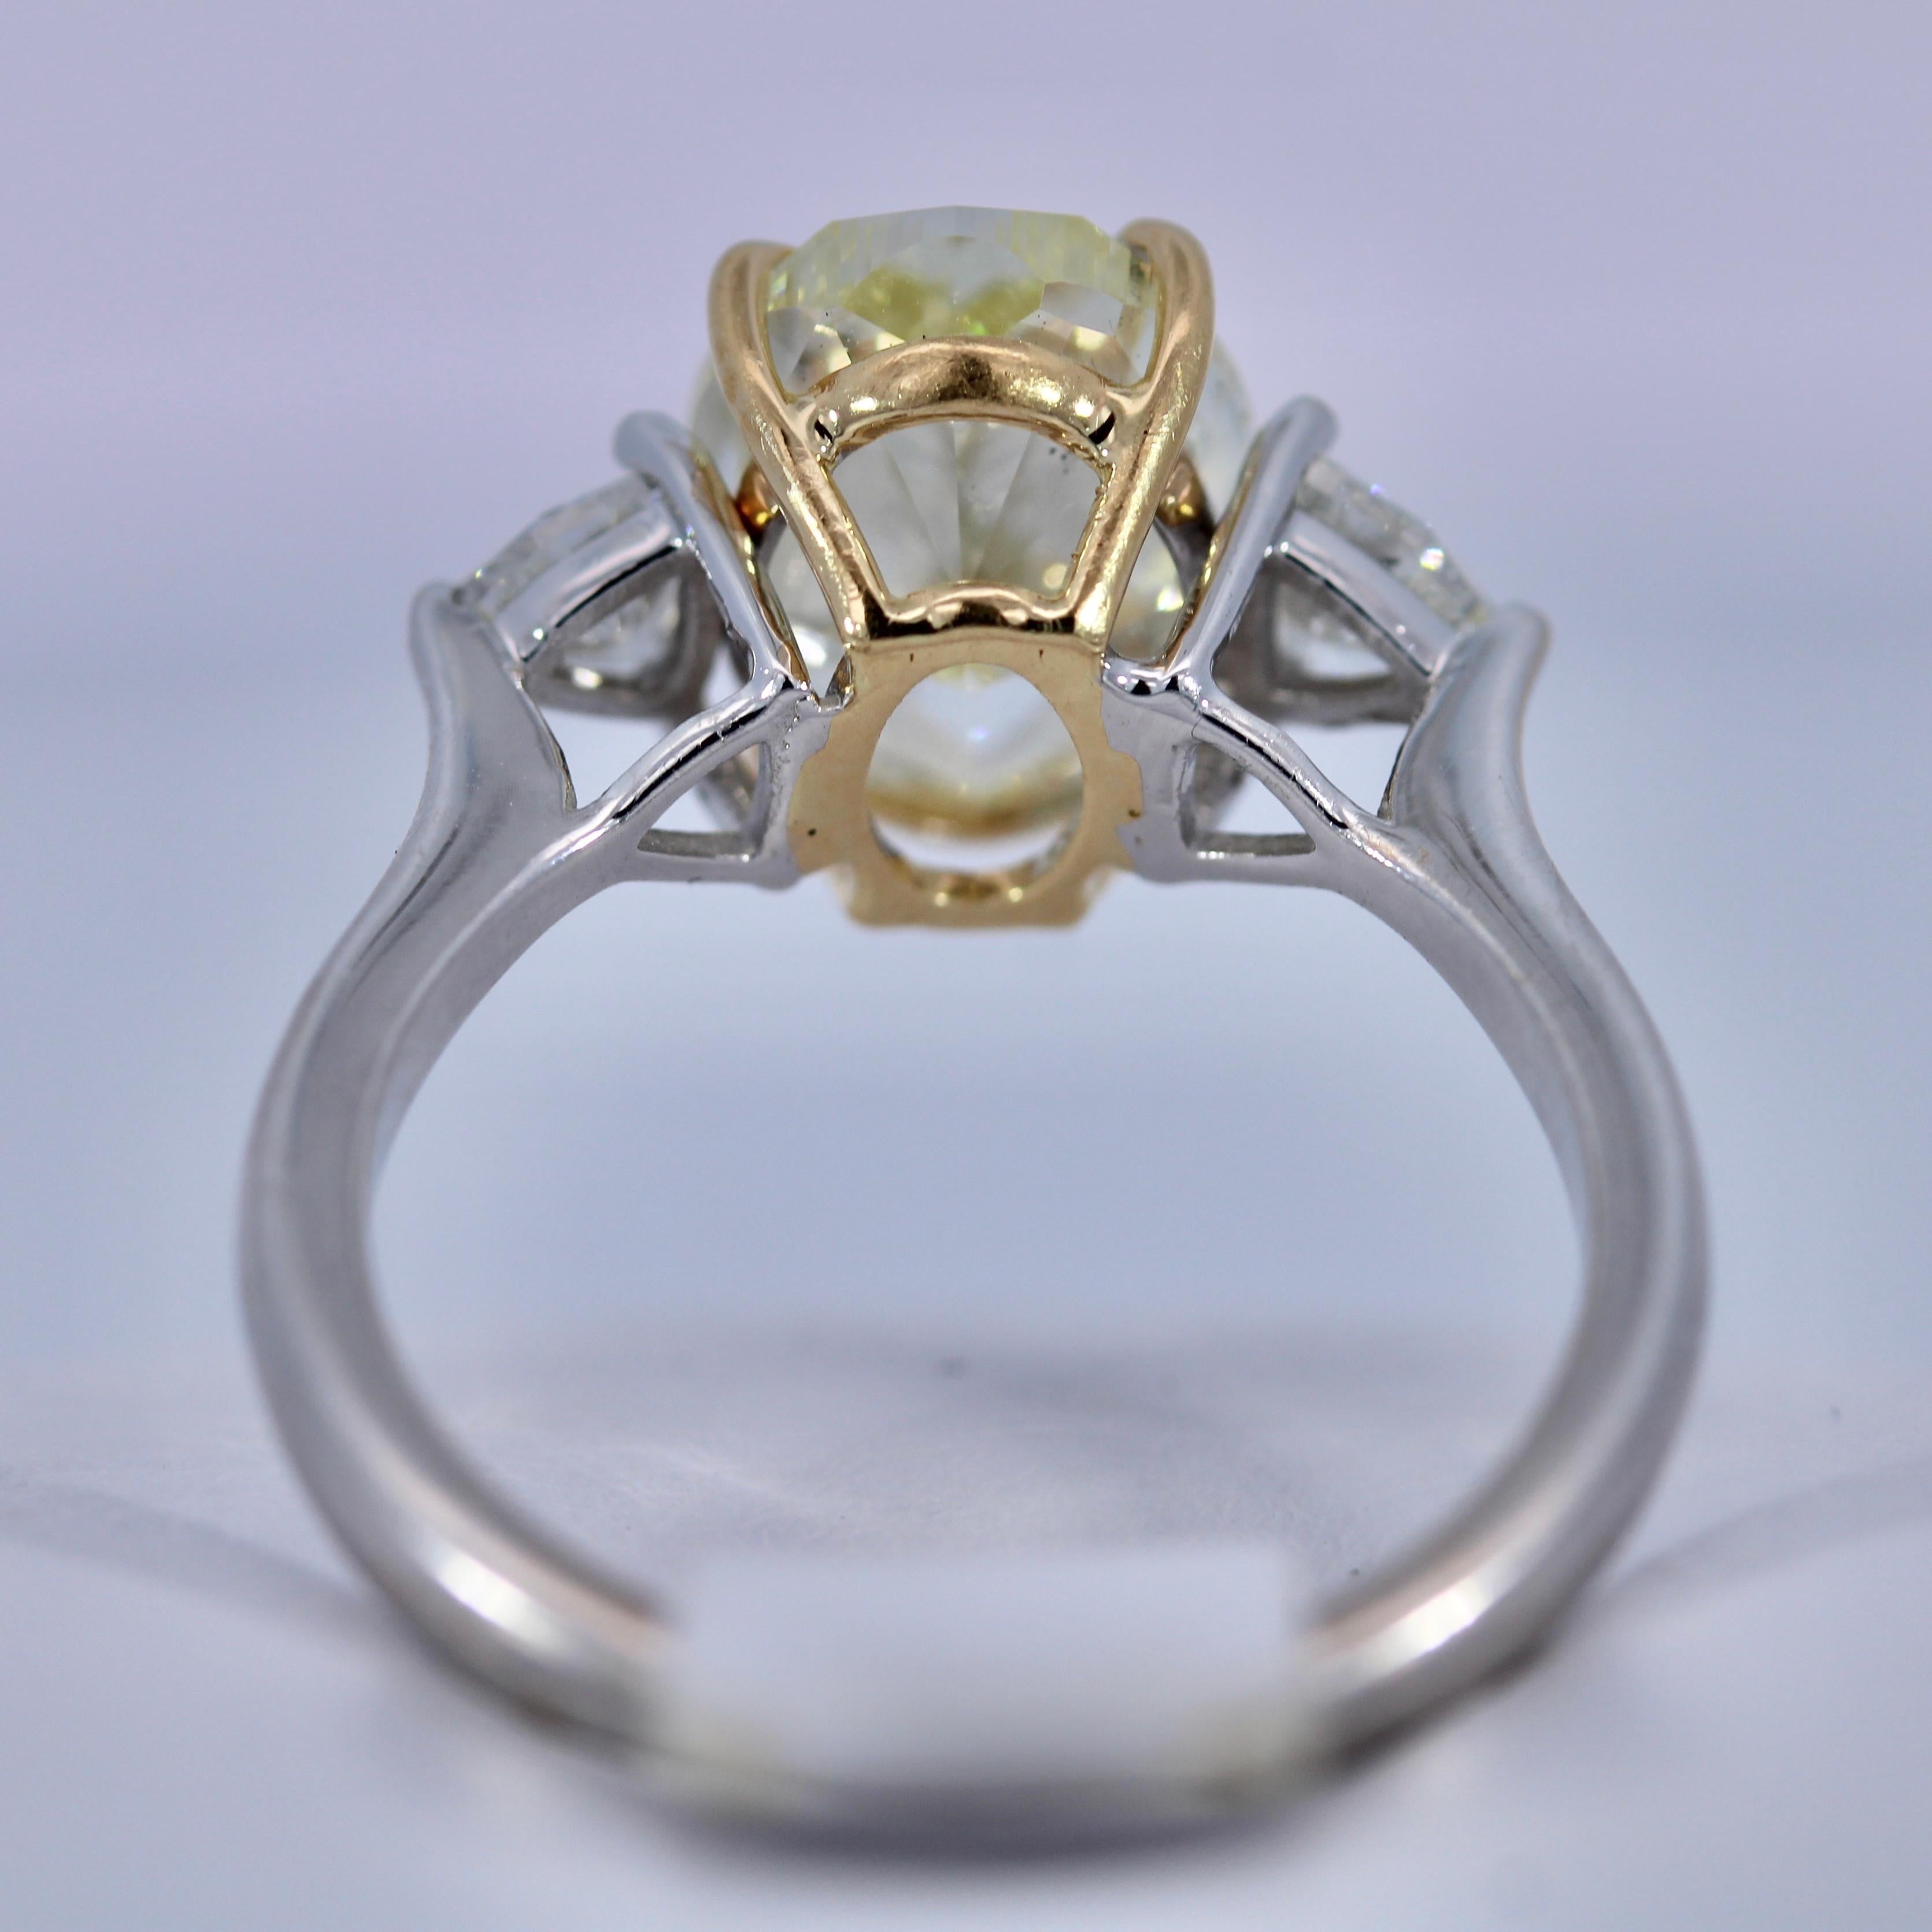 GIA Certified 3.67 Carat Light Yellow Diamond 18K White Gold Solitaire Ring 
Oval shape of Yellow Diamond
0.30 Carat of side diamonds
Measurements: 11.11 x 8.03 x 5.13 mm
Weight of ring: 4.4g
Size of ring: 5.5 US (resizable)
GIA Certificate